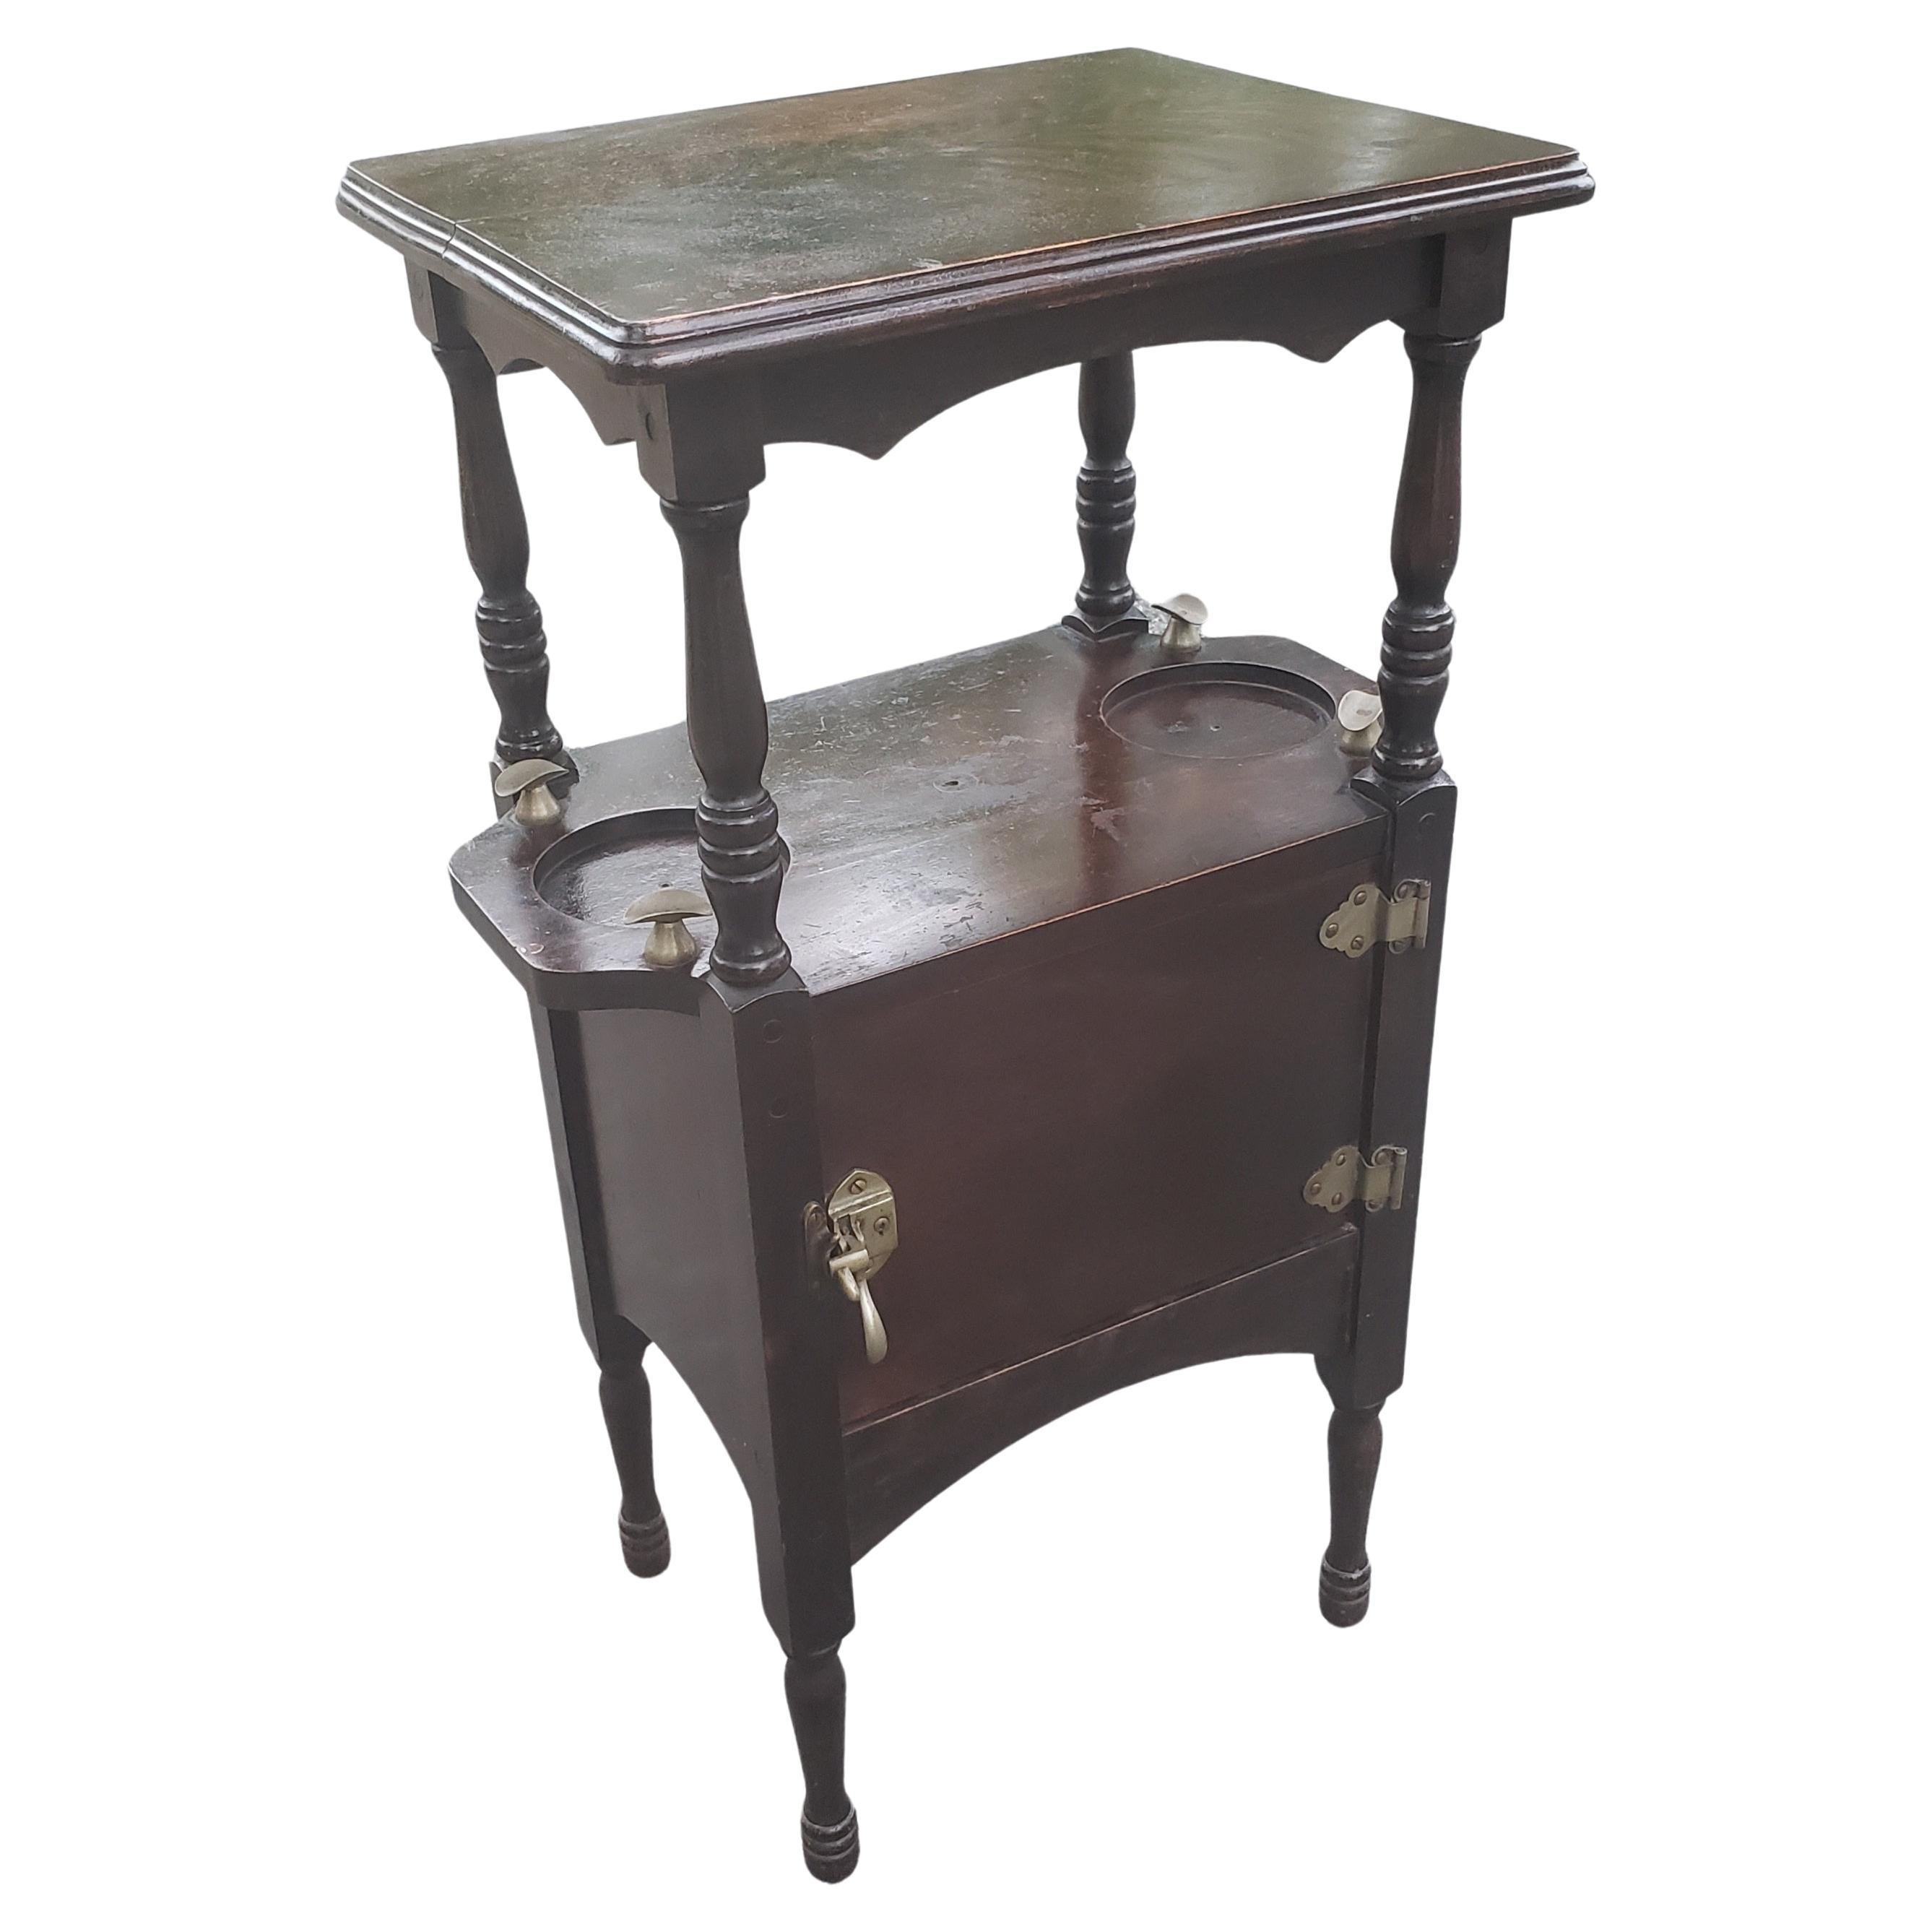 American Antique H. T. Cushman Flame Mahogany Smoking Table Stand, circa 1890s For Sale